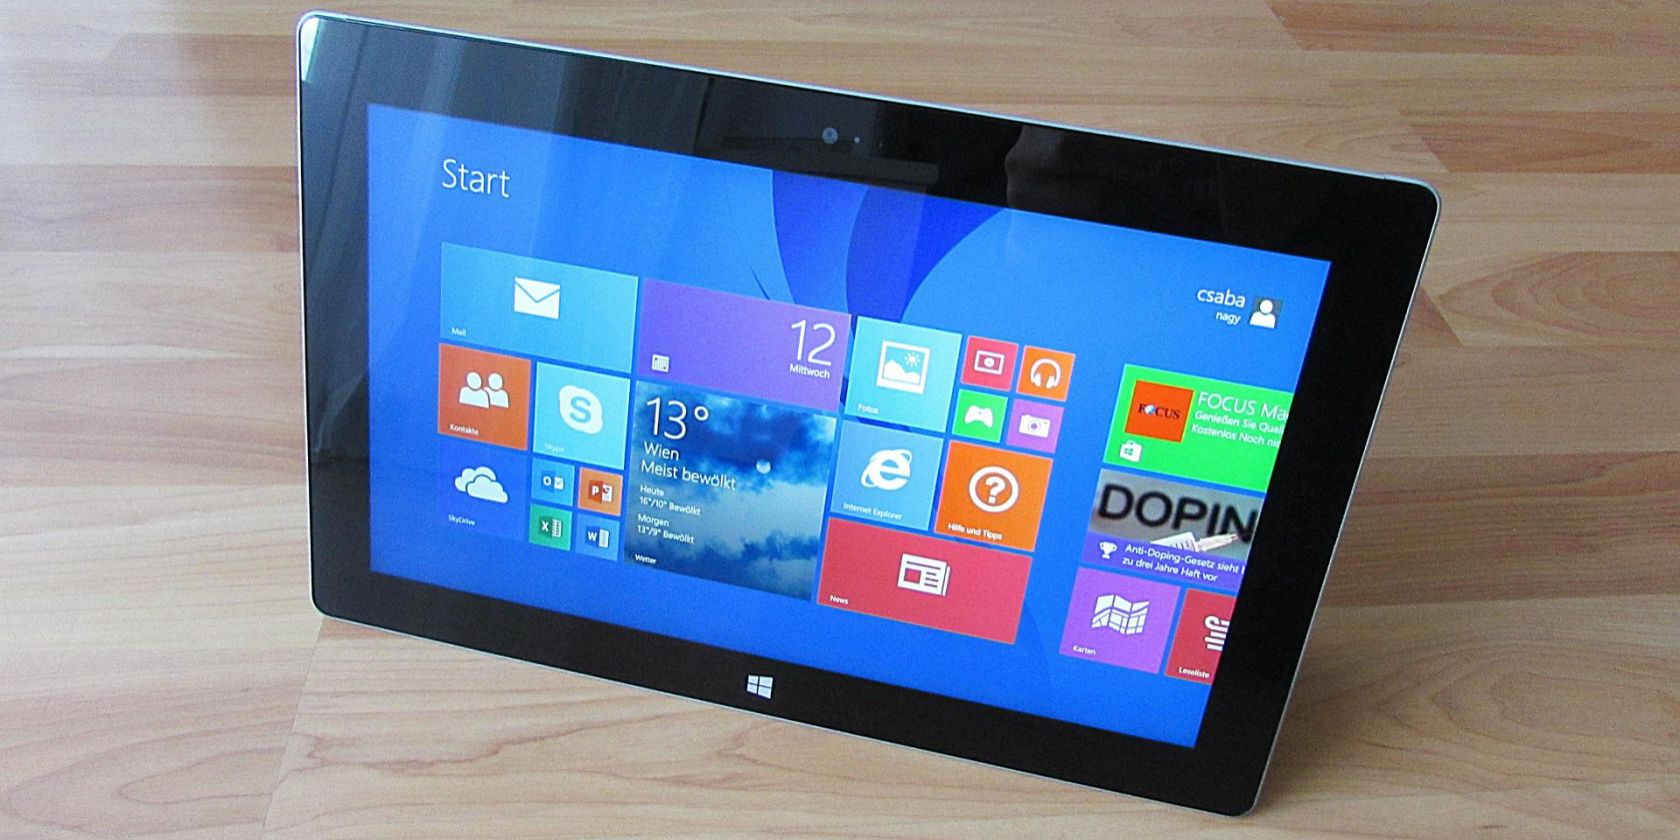 A Windows tablet featuring Windows 8.1